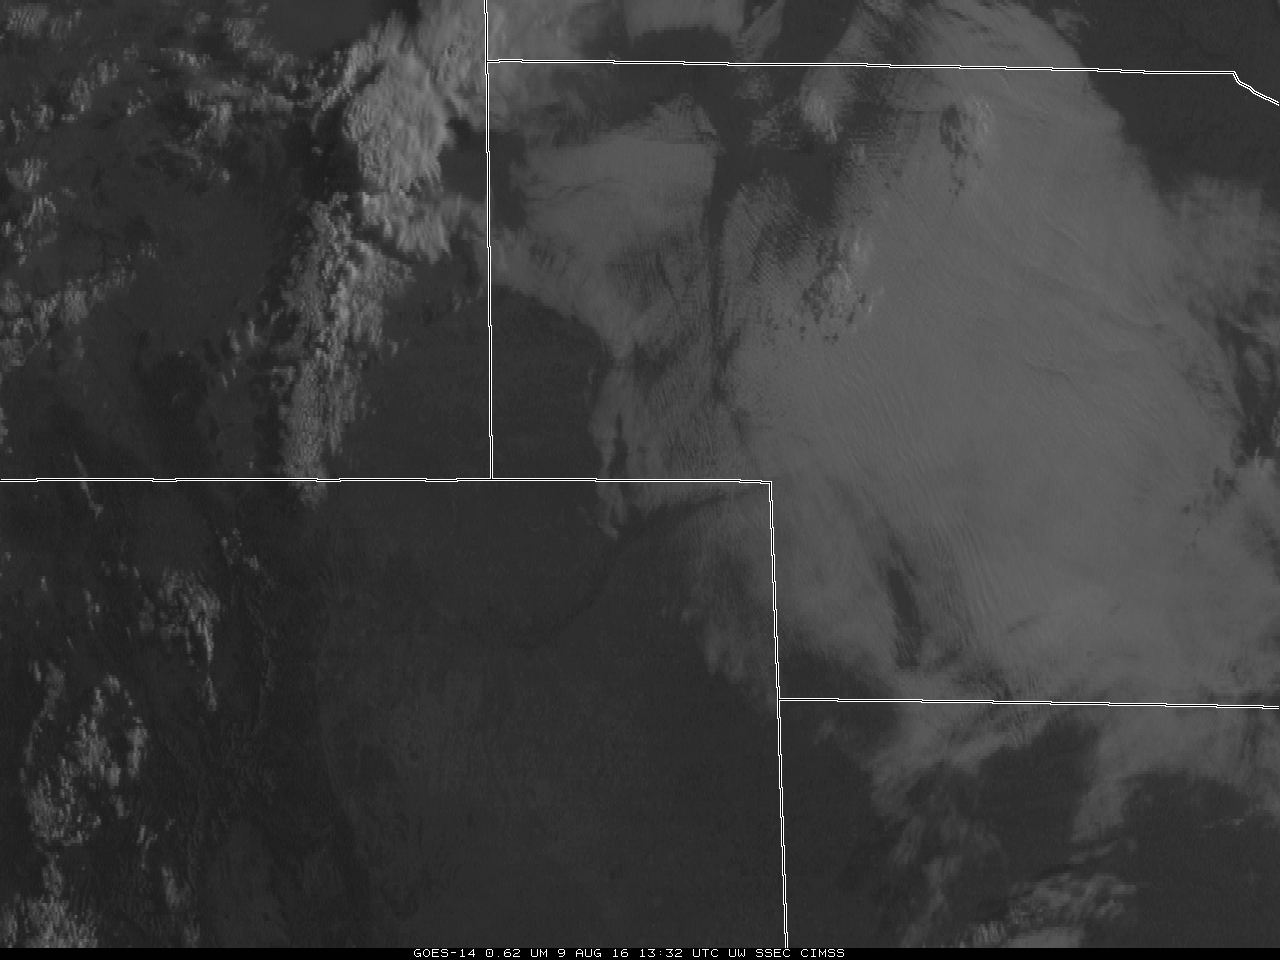 GOES-14 Visible (0.62 µm) images [click to play animation]